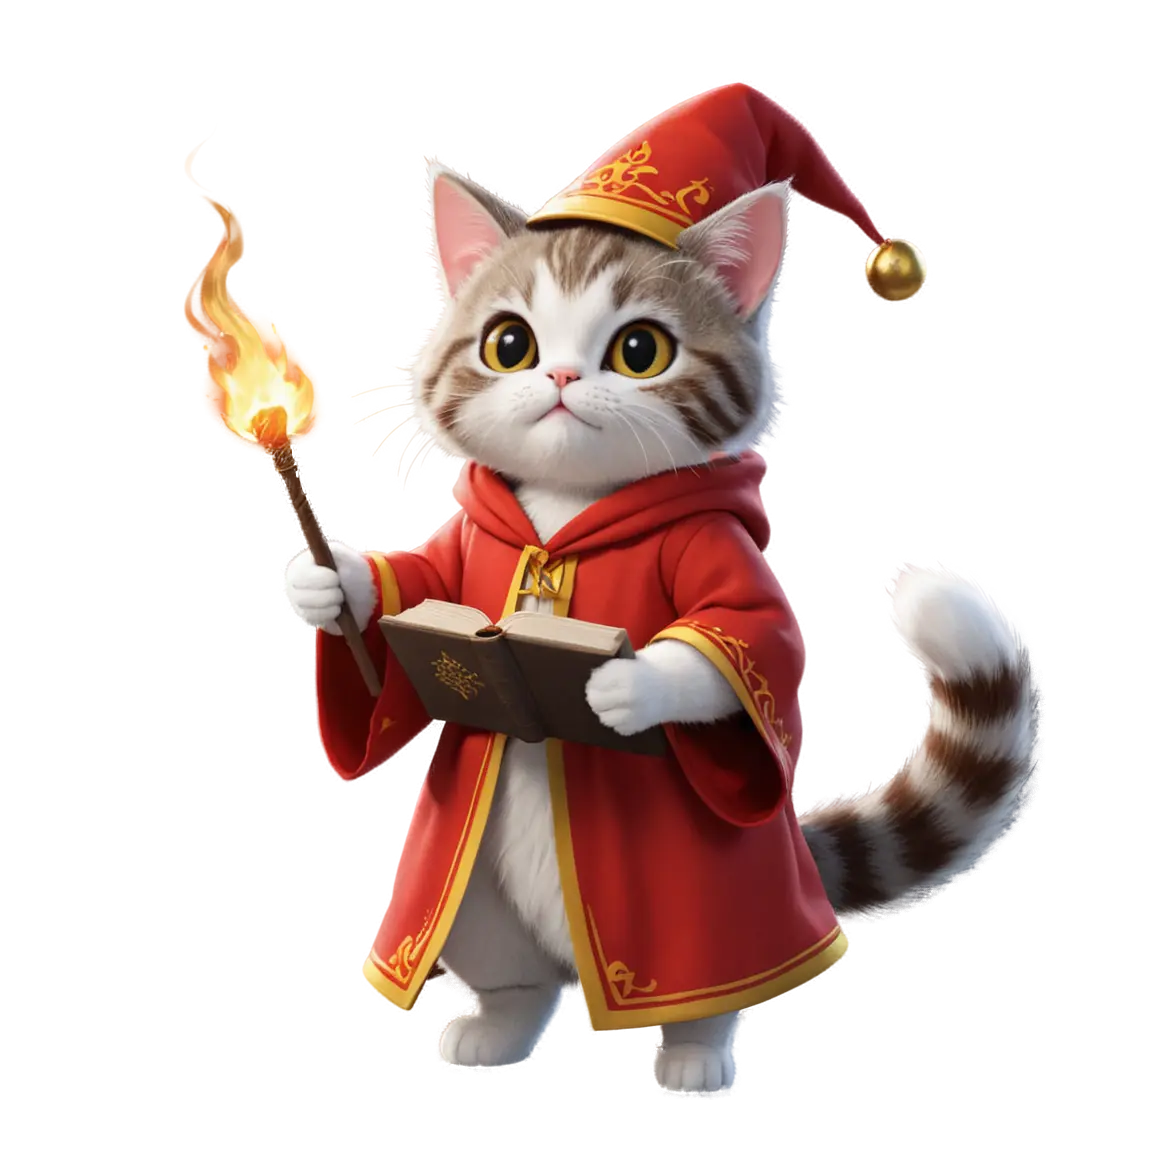 a cute cat dressed as a wizard casting fire spell with staff and holding a open book on the in other hand, wearing red robe